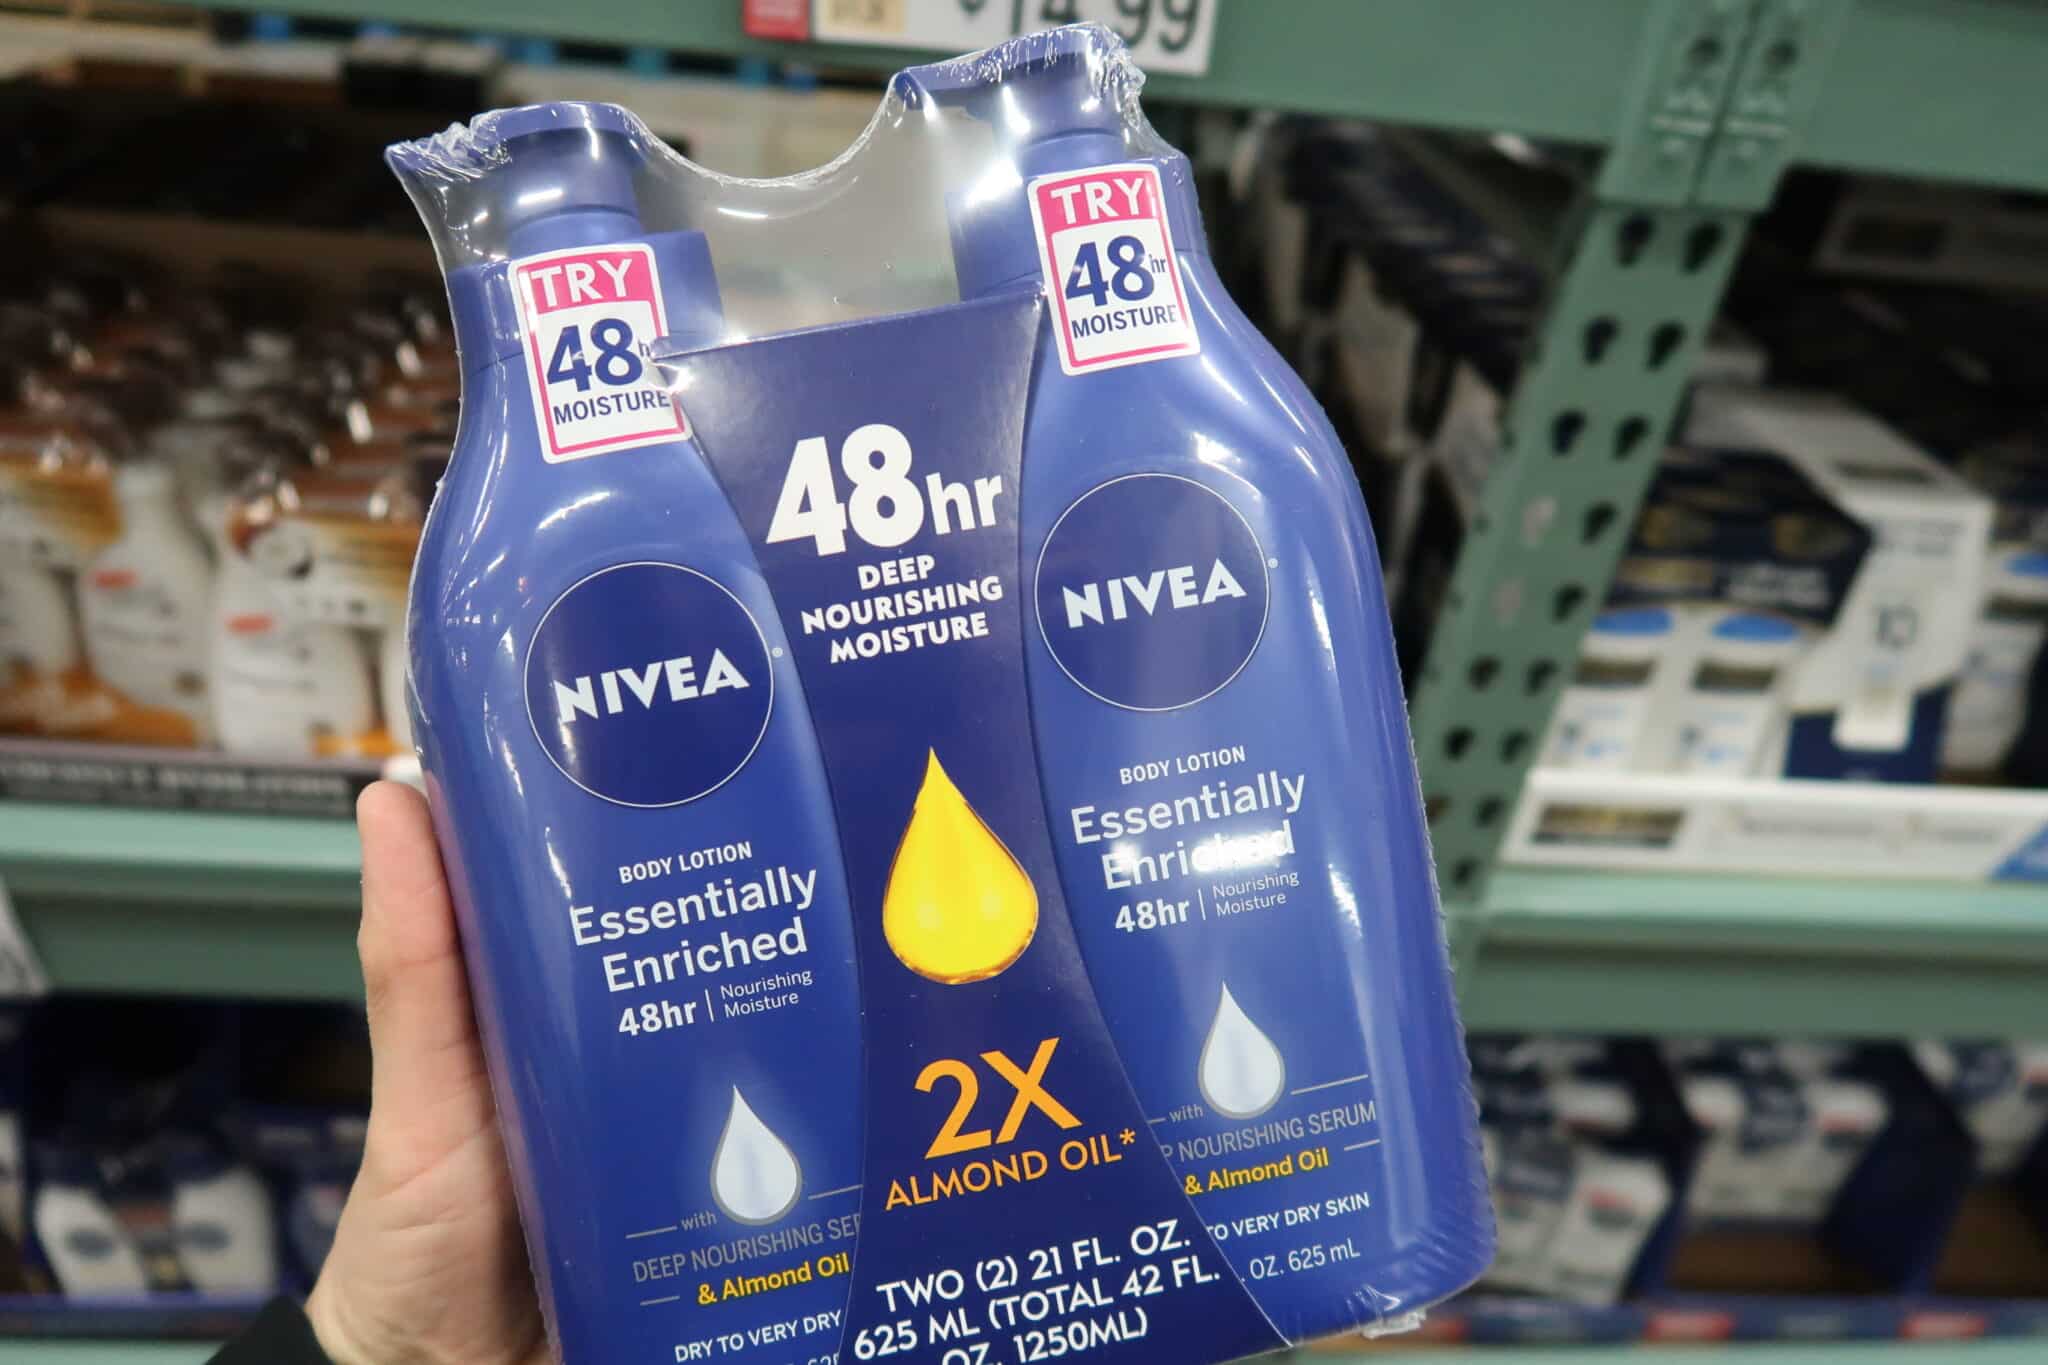 Nivea Essentially Enriched Lotion $3.99!